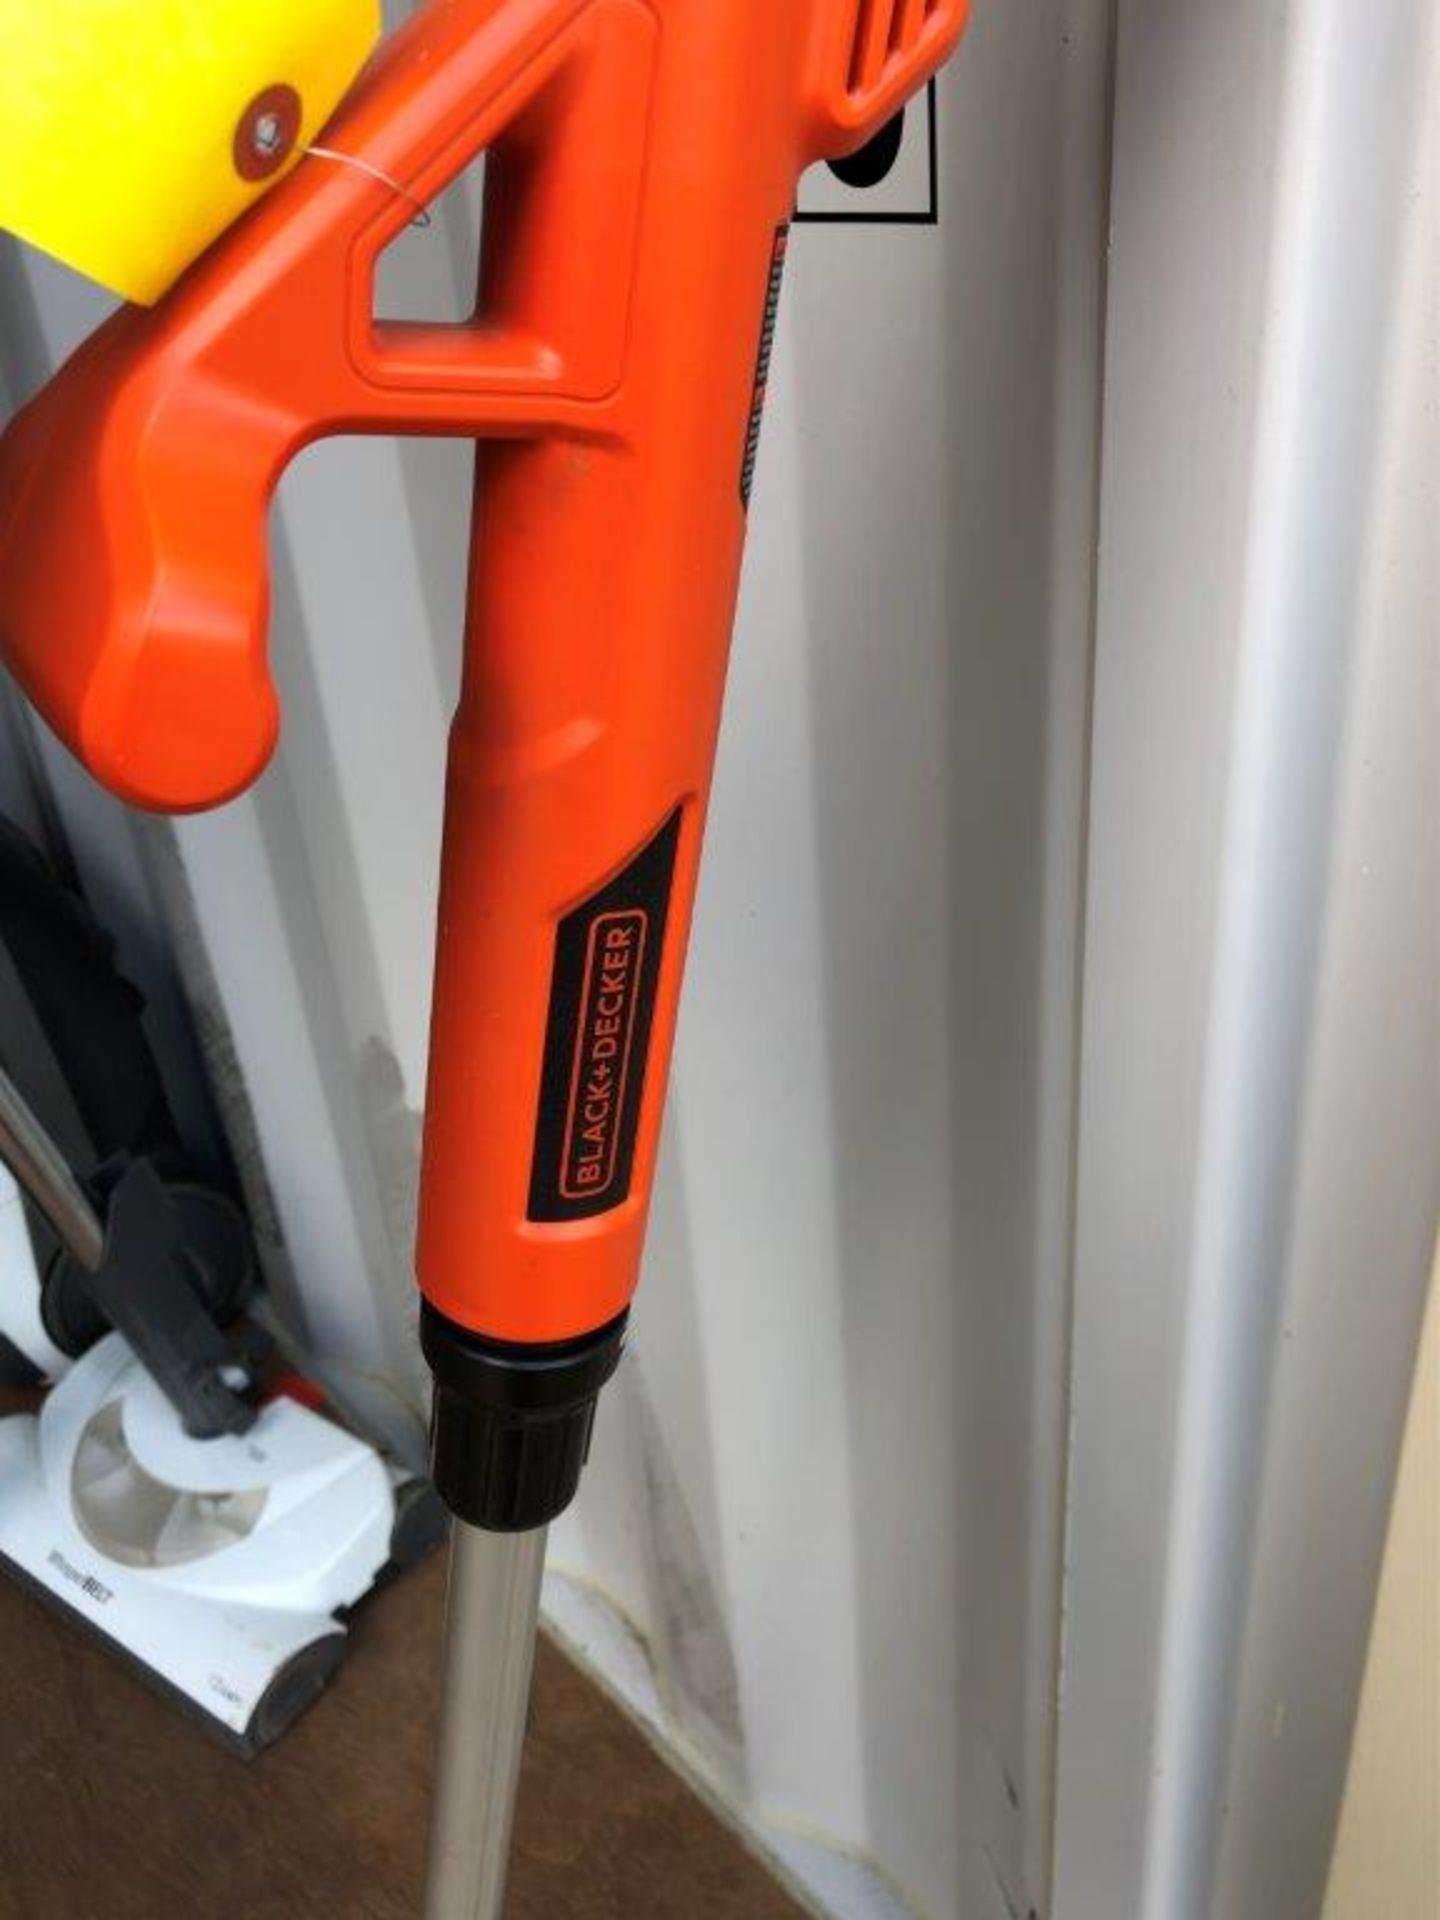 BLACK AND DECKER CORDLESS STRING TRIMMER, NO BATTERY OR CHARGER - Image 2 of 2